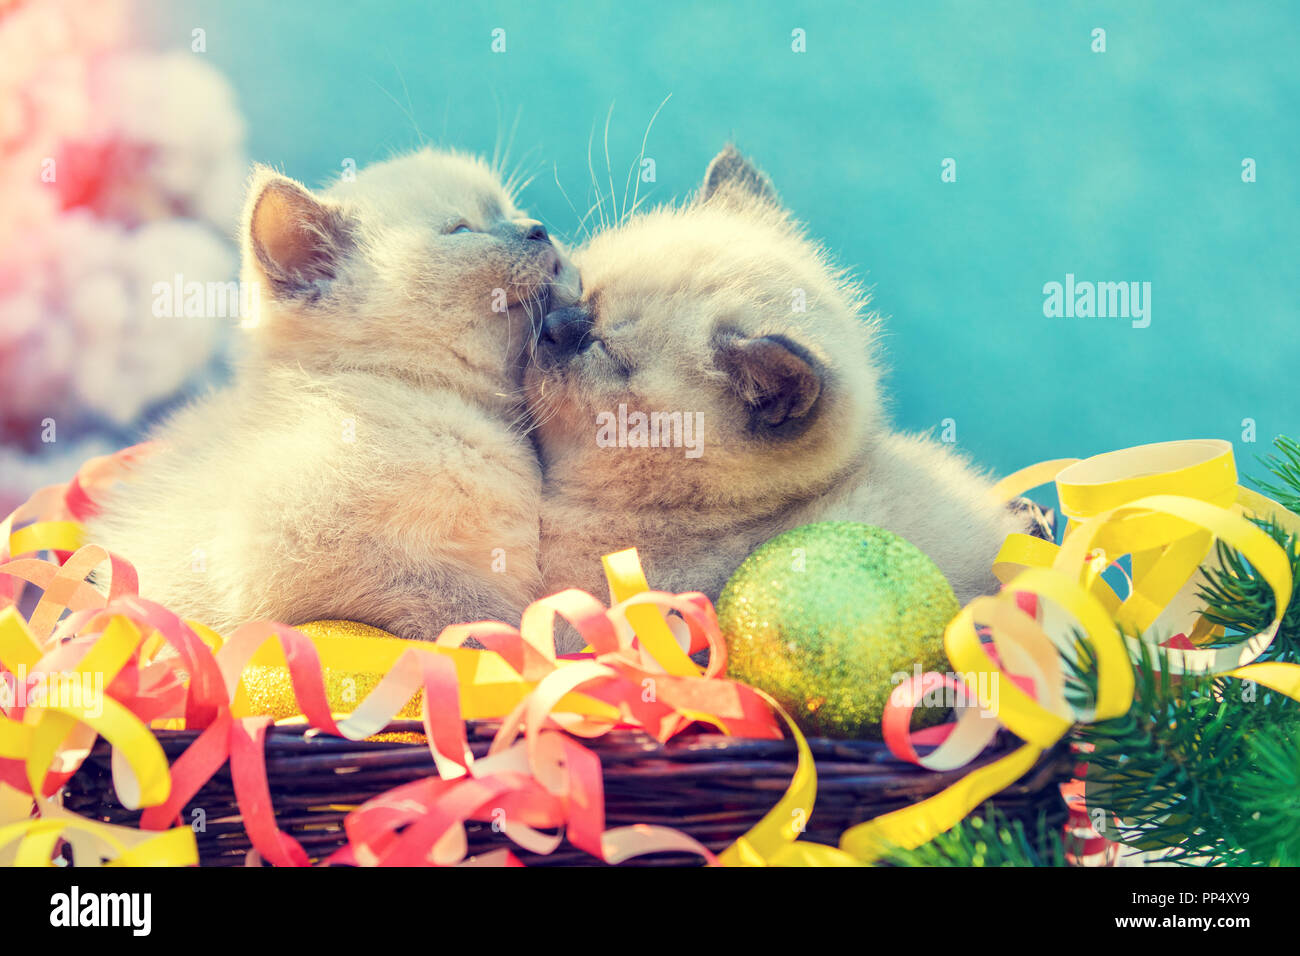 Two cute little kittens with Christmas decoration. Kittens wrapped in serpentine, sitting in a basket near fir tree in winter Stock Photo